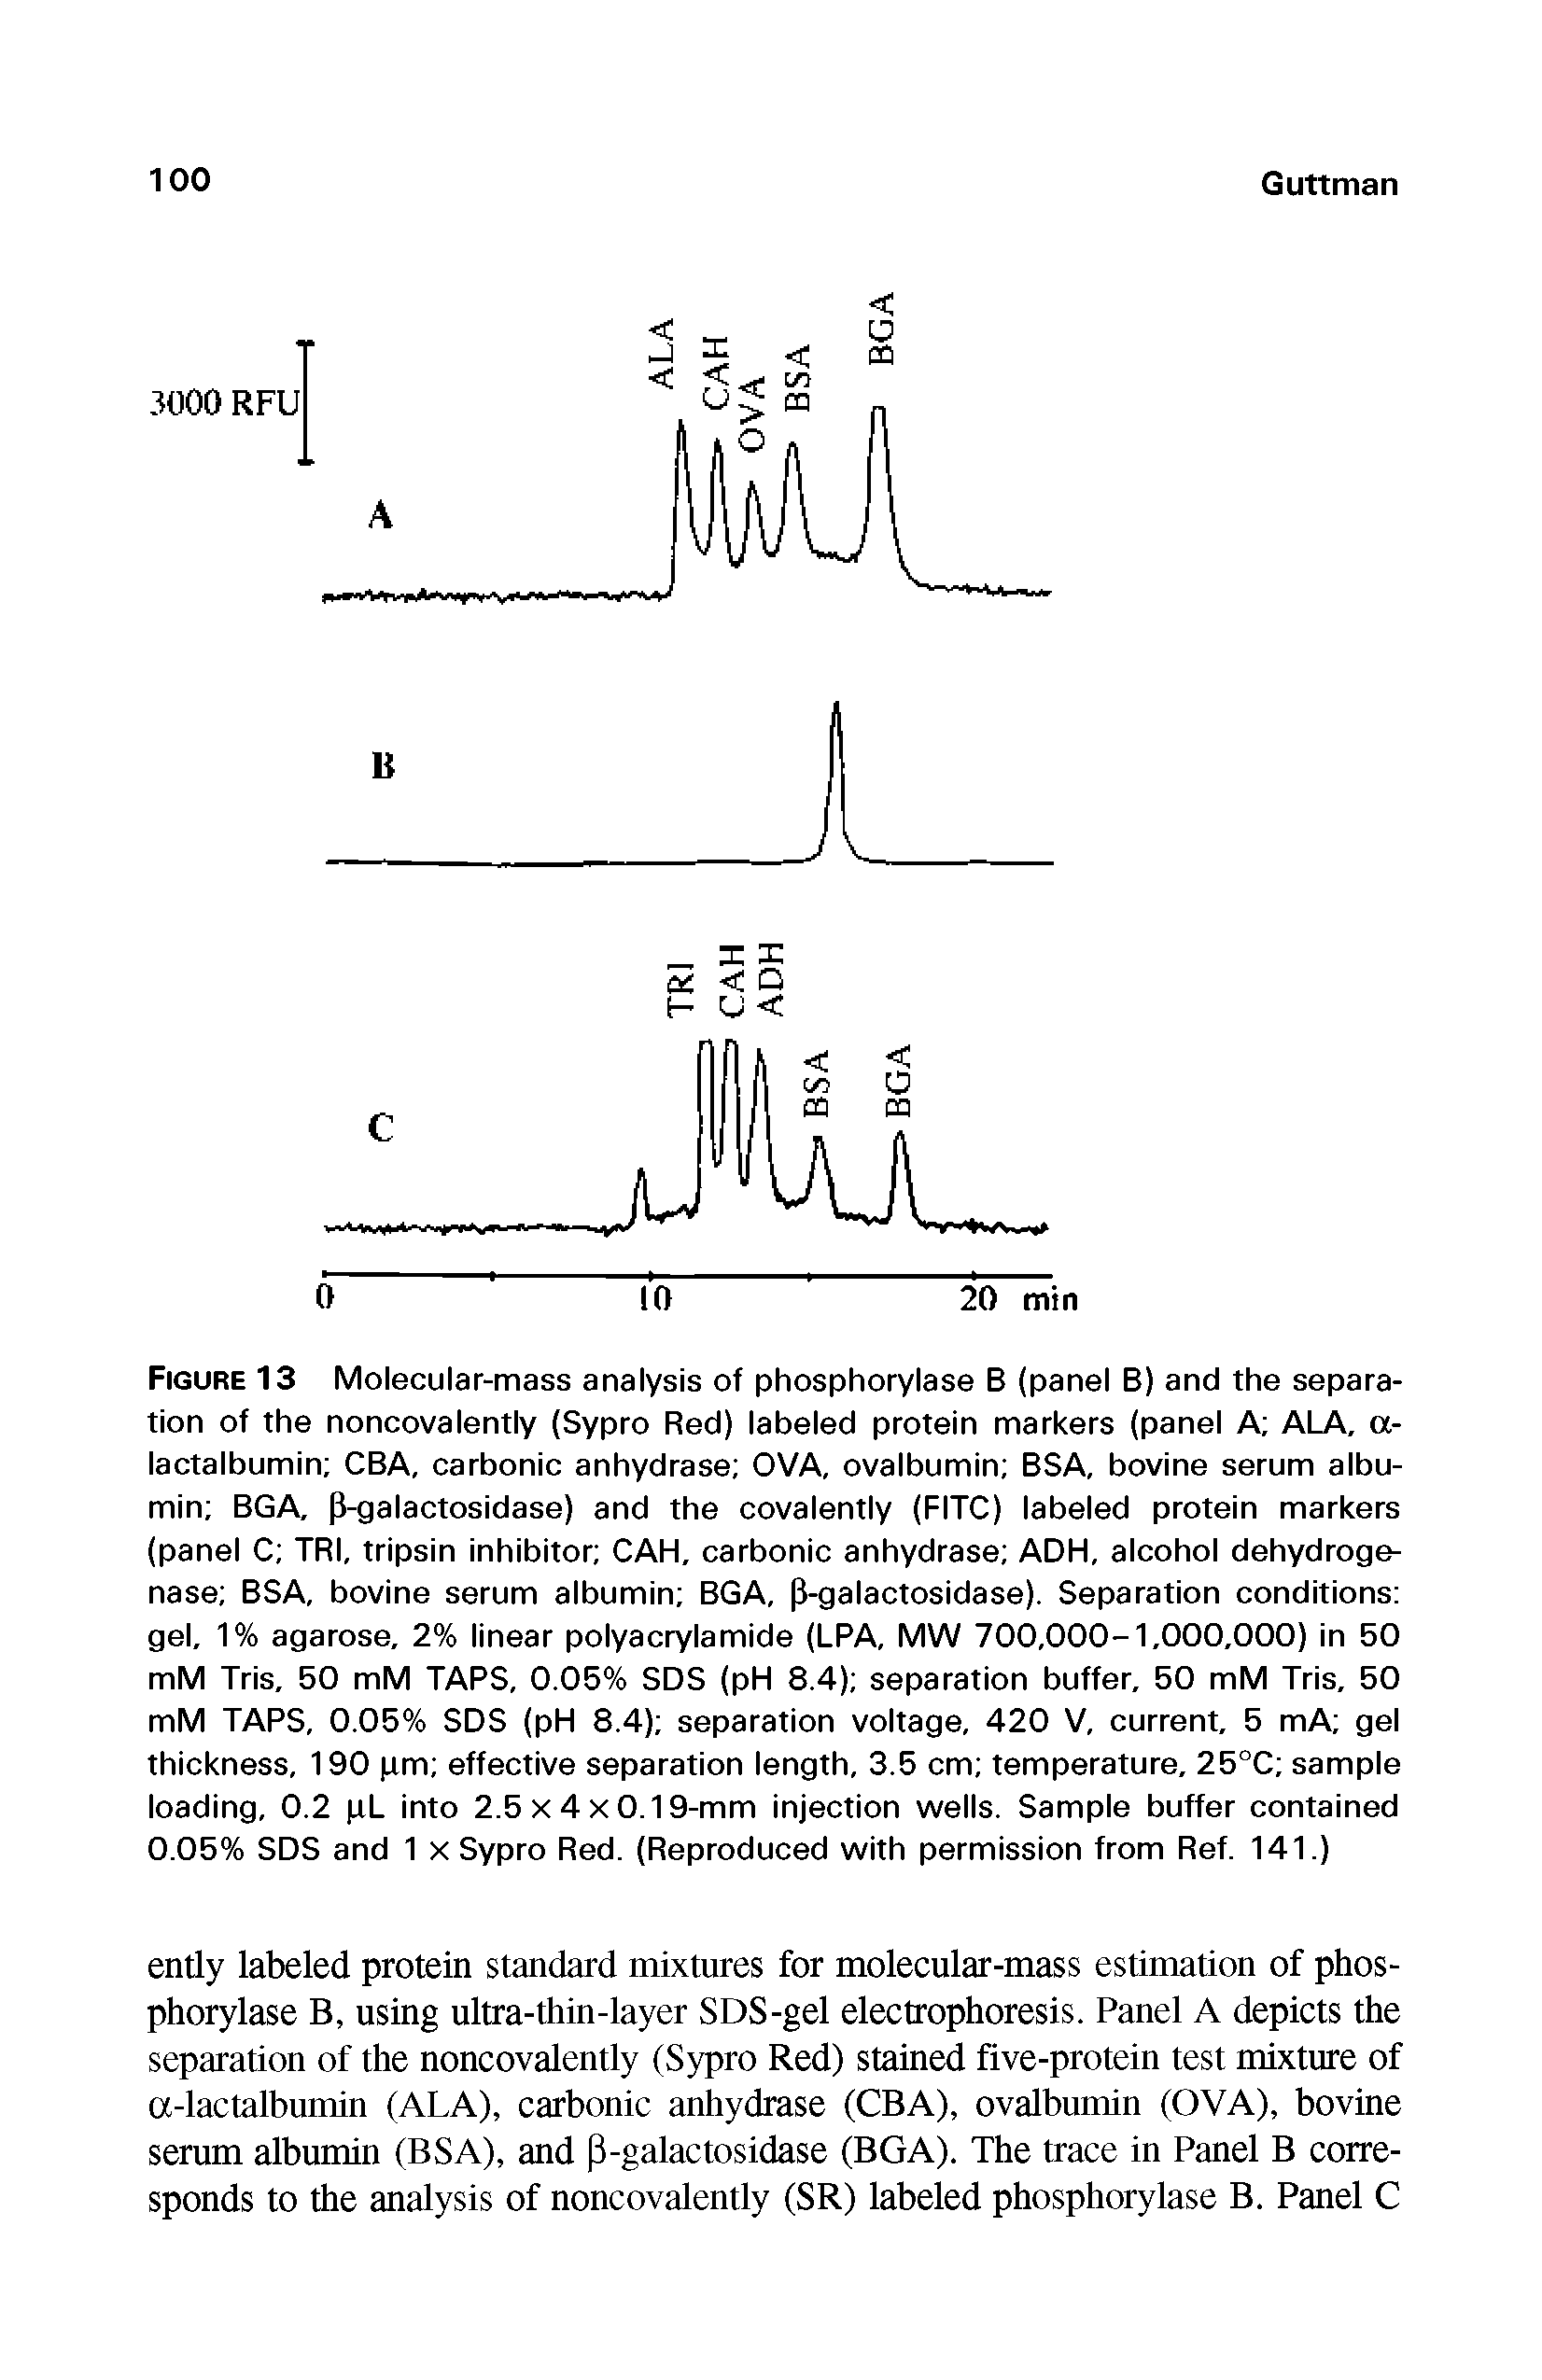 Figure 13 Molecular-mass analysis of phosphorylase B (panel B) and the separation of the noncovalently (Sypro Red) labeled protein markers (panel A ALA, a-lactalbumin CBA, carbonic anhydrase OVA, ovalbumin BSA, bovine serum albumin BGA, (f-galactosidase) and the covalently (FITC) labeled protein markers (panel C TRI, tripsin inhibitor CAH, carbonic anhydrase ADH, alcohol dehydrogenase BSA, bovine serum albumin BGA, P-galactosidase). Separation conditions gel, 1% agarose, 2% linear polyacrylamide (LPA, MW 700,000-1,000,000) in 50 mM Tris, 50 mM TAPS, 0.05% SDS (pH 8.4) separation buffer, 50 mM Tris, 50 mM TAPS, 0.05% SDS (pH 8.4) separation voltage, 420 V, current, 5 mA gel thickness, 190 pm effective separation length, 3.5 cm temperature, 25°C sample loading, 0.2 pL into 2.5 x 4 x 0.19-mm injection wells. Sample buffer contained 0.05% SDS and 1 x Sypro Red. (Reproduced with permission from Ref. 141.)...